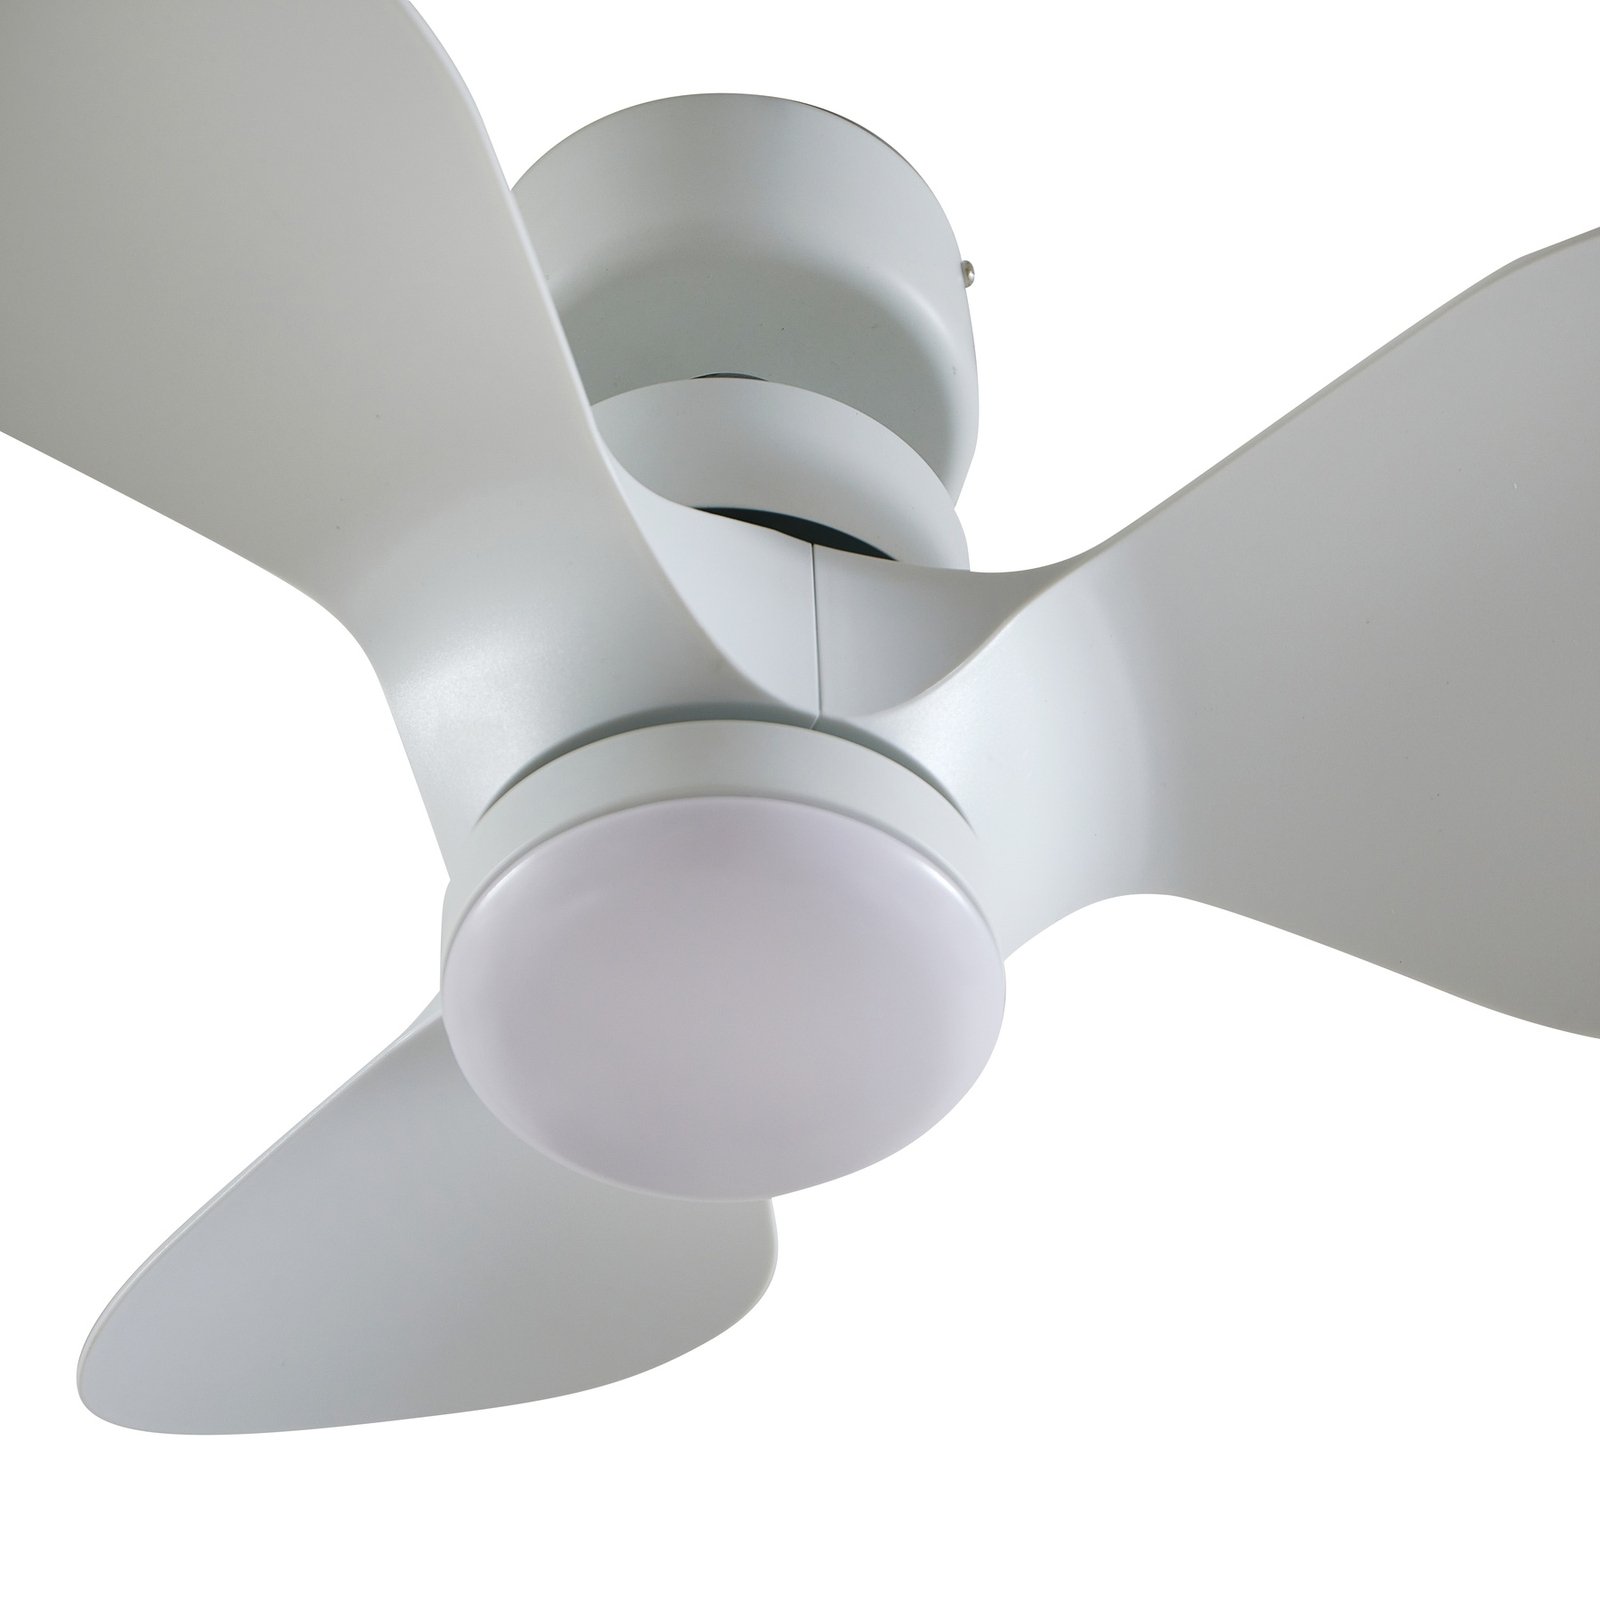 Lindby LED ceiling fan Enon, white, DC motor, quiet